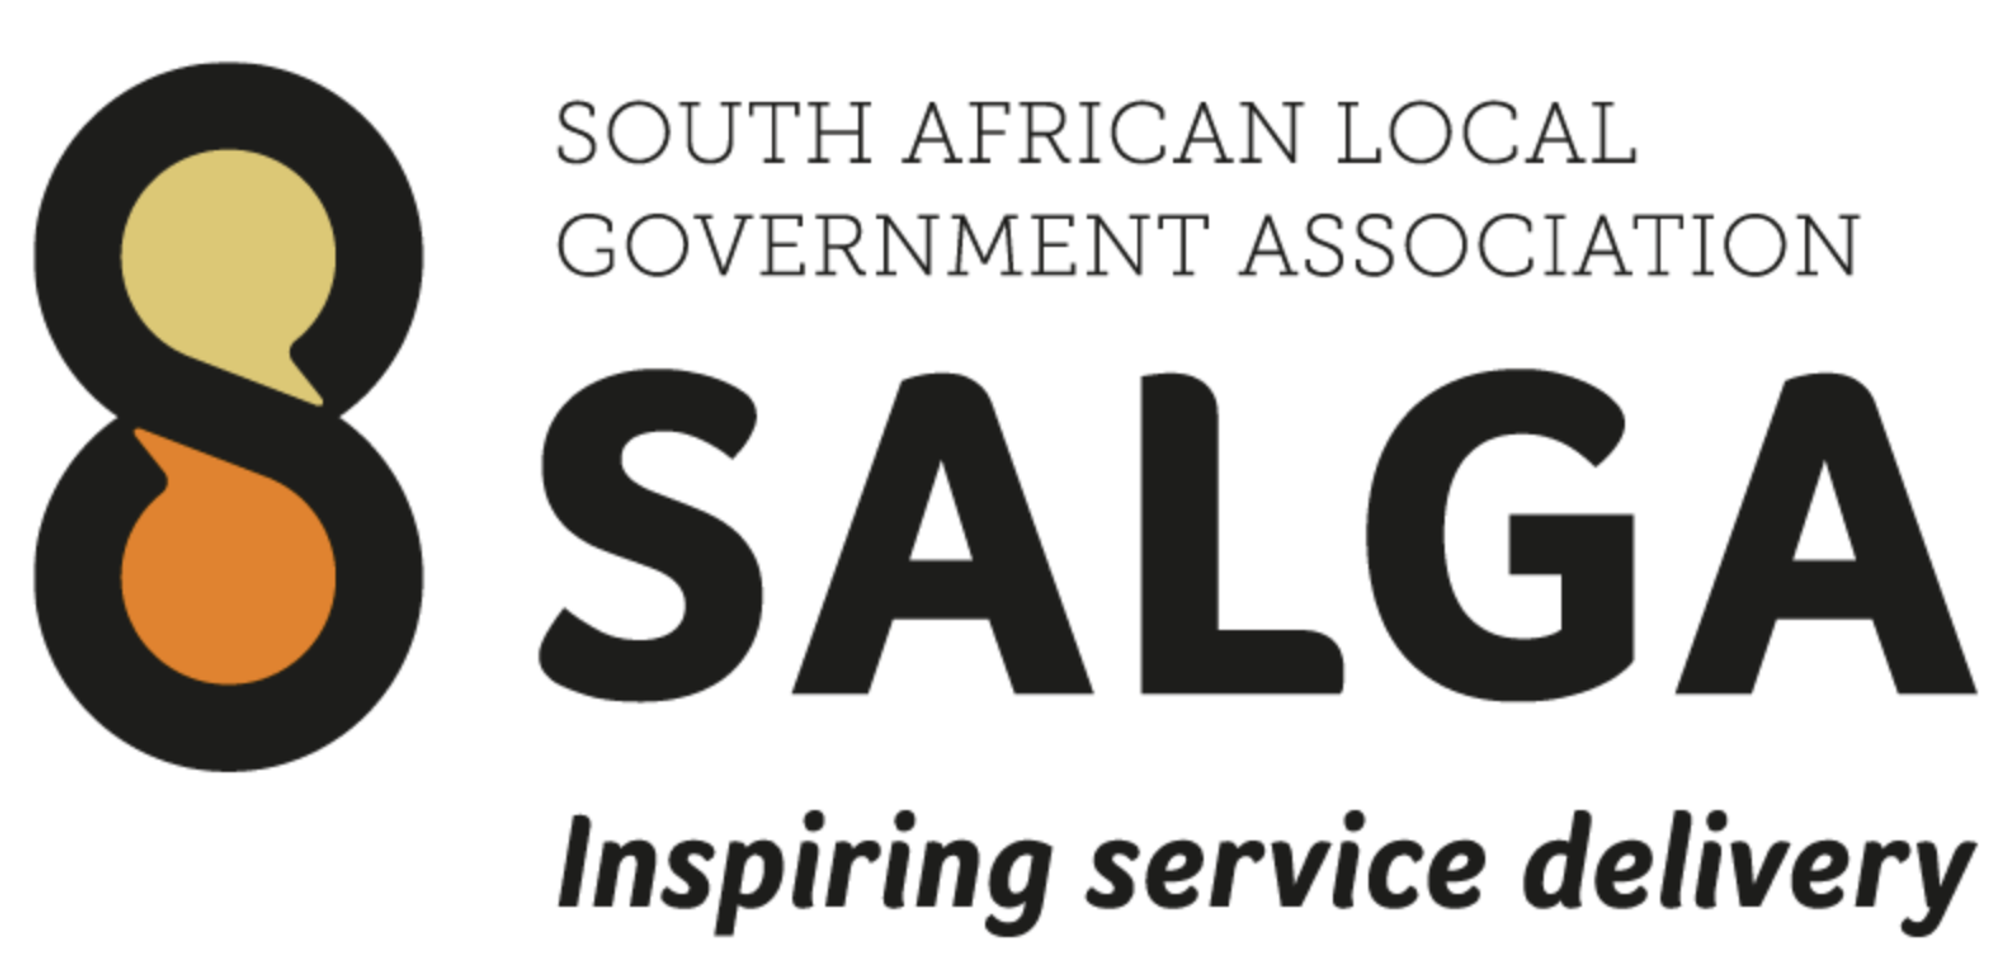 The South African Local Government Association